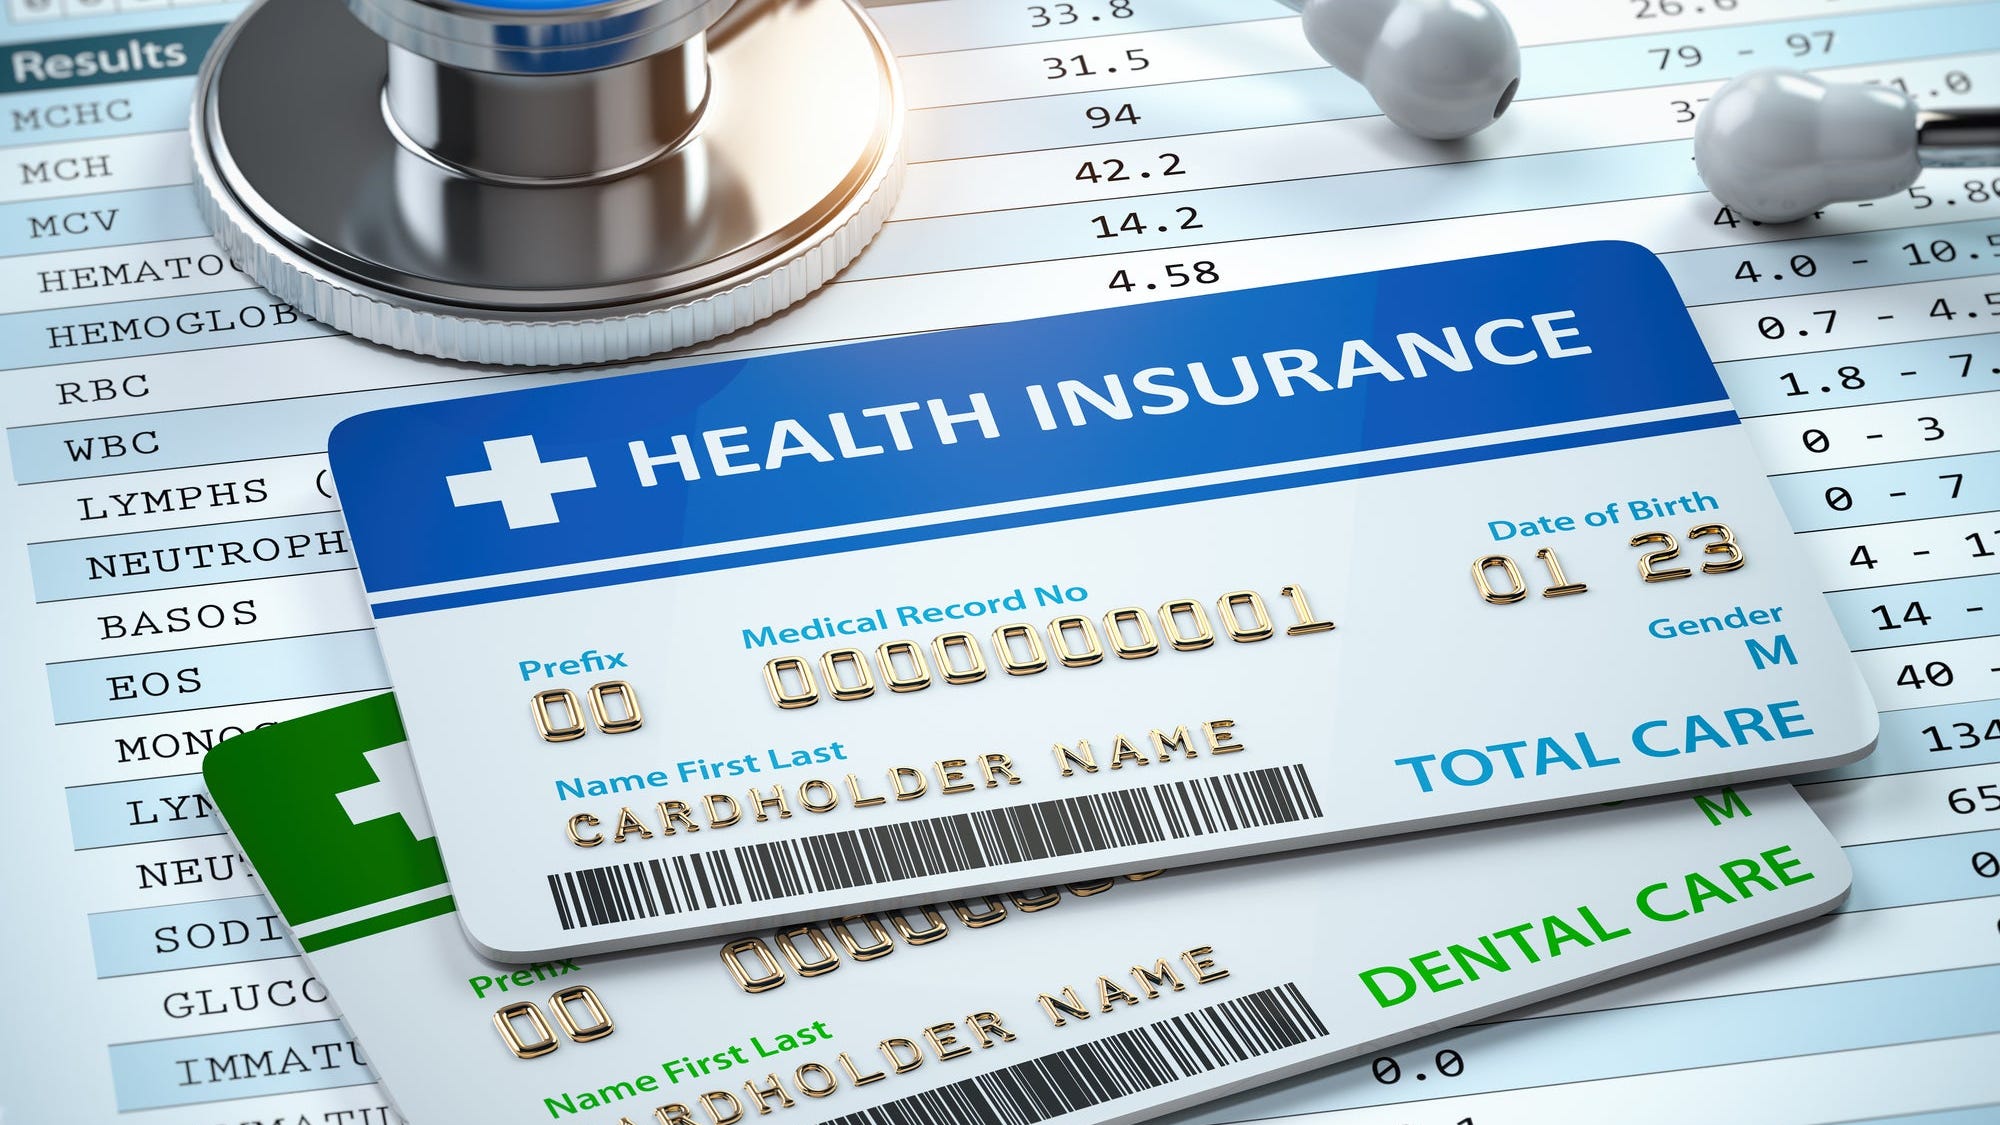 NJ small business: Health insurance rescue plan for struggling places